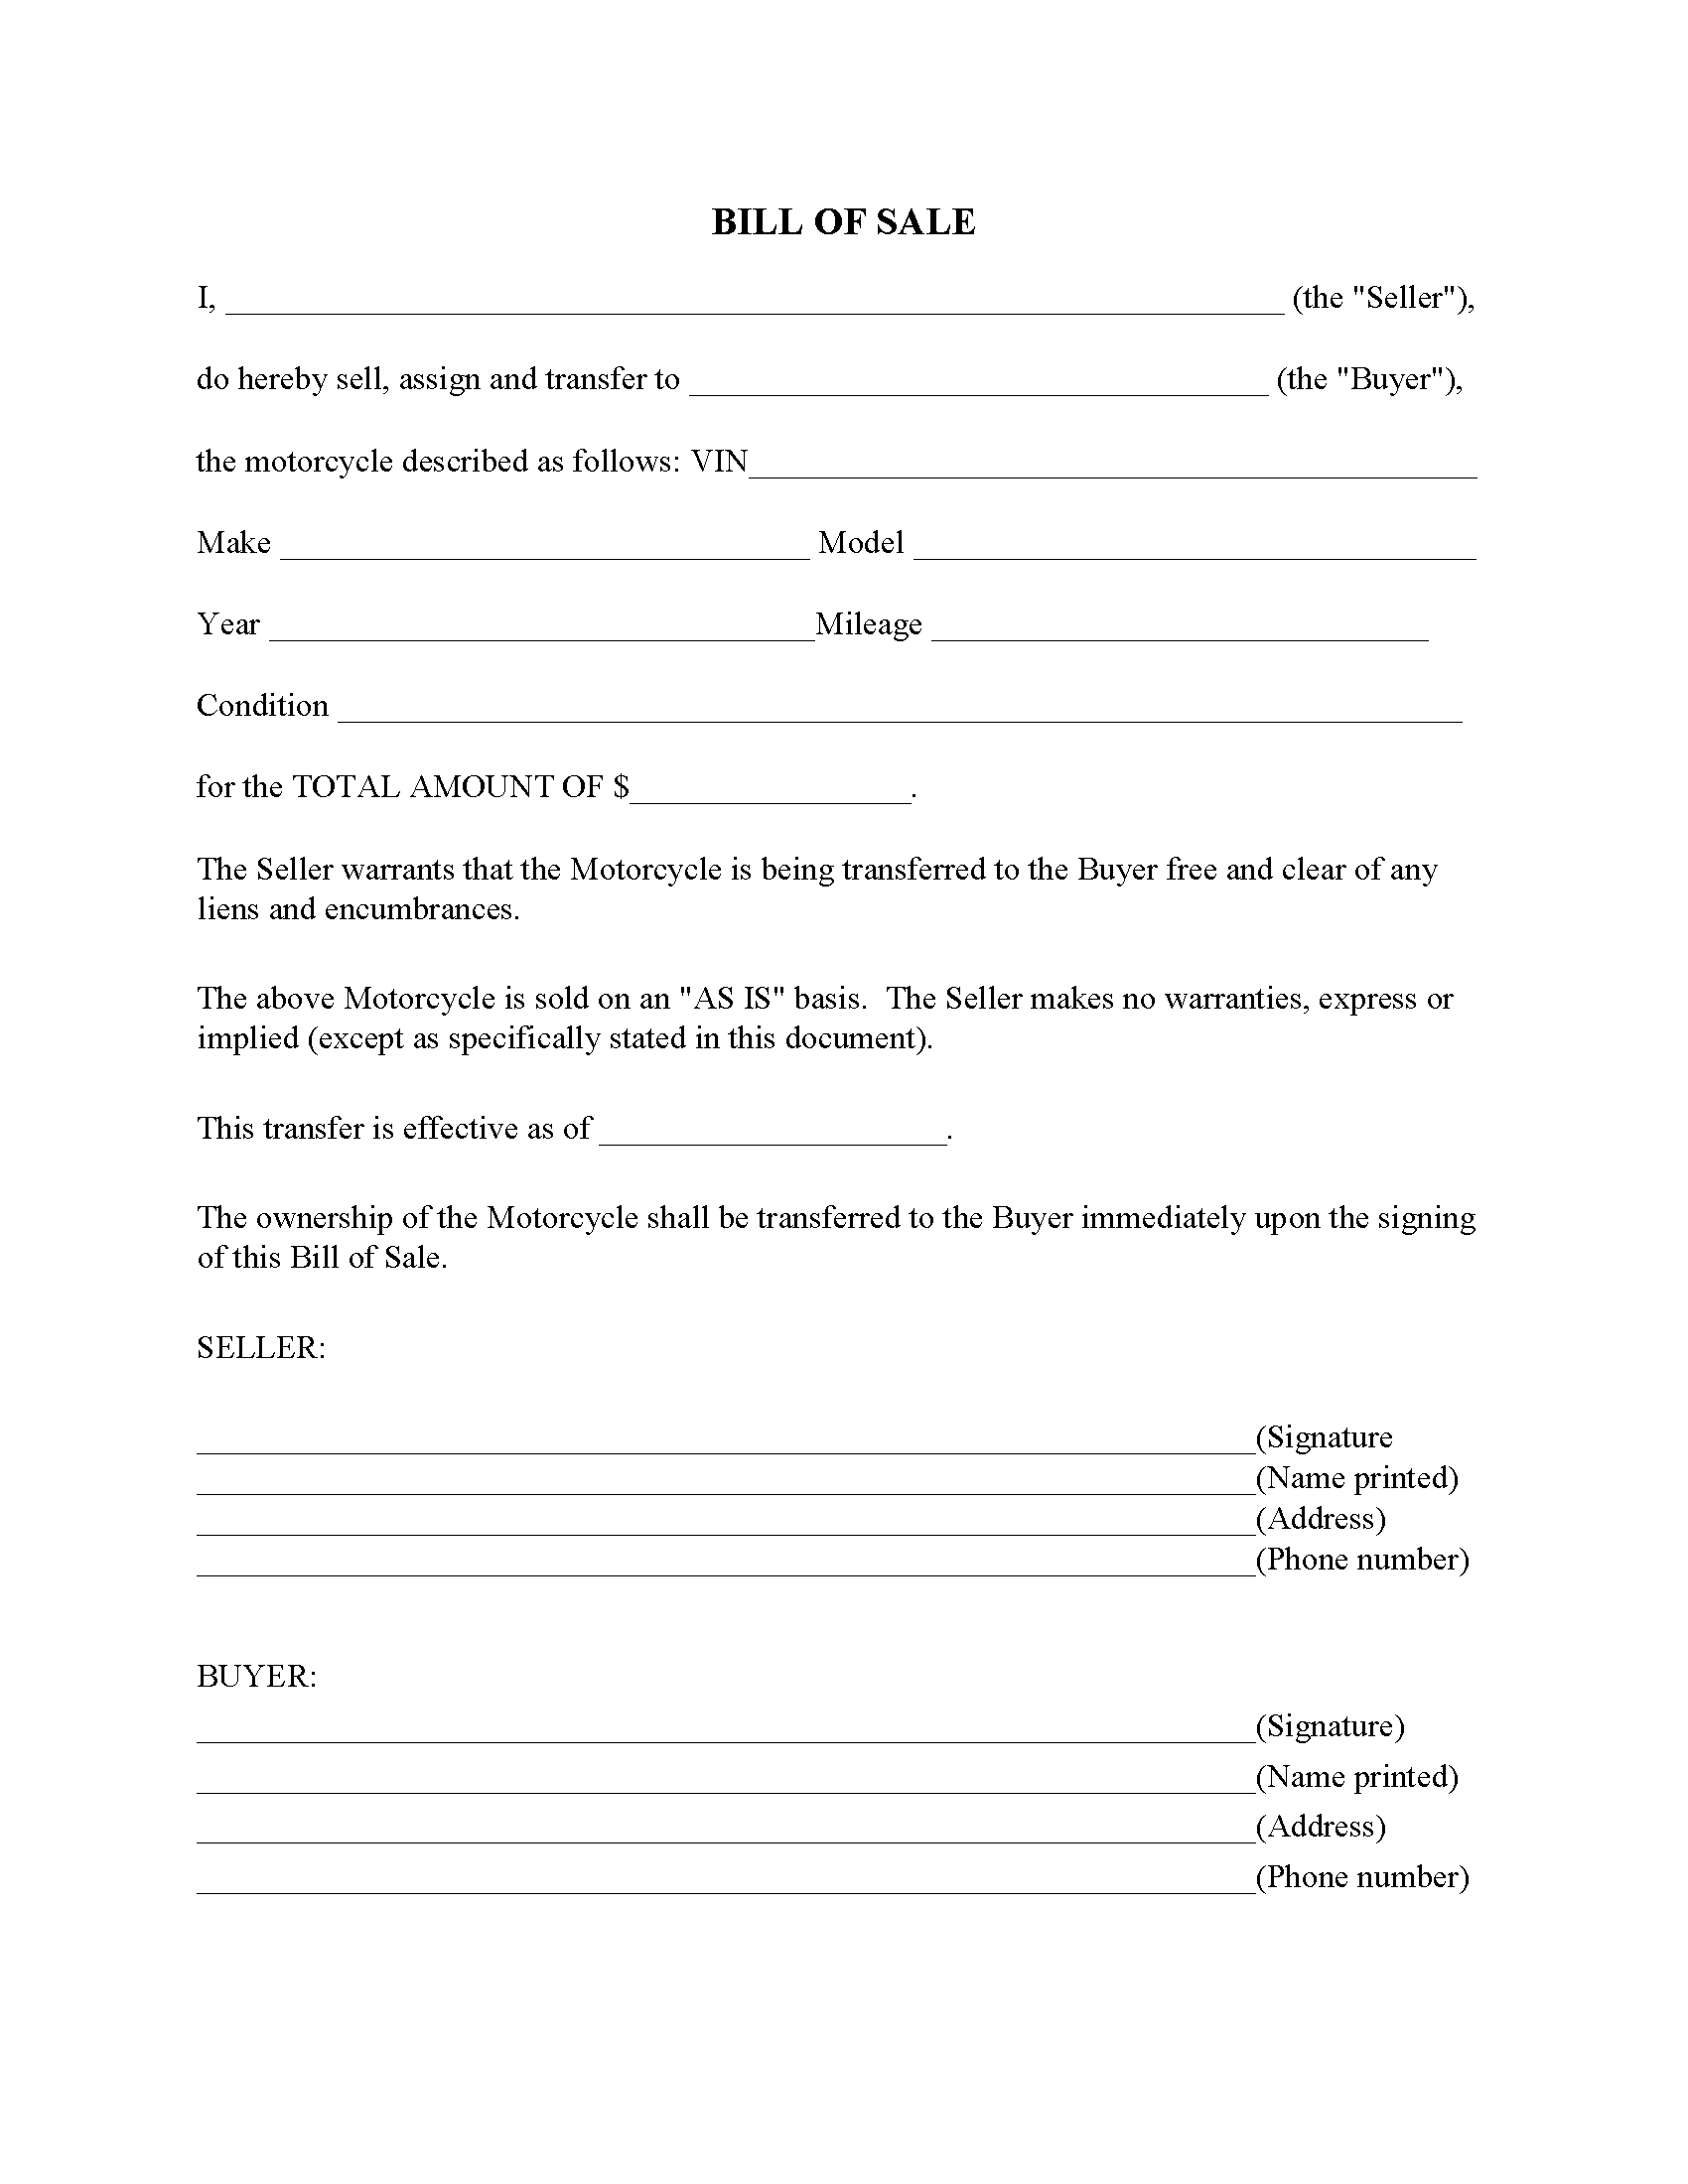 Louisiana Motorcycle Bill of Sale Form Free Printable Legal Forms